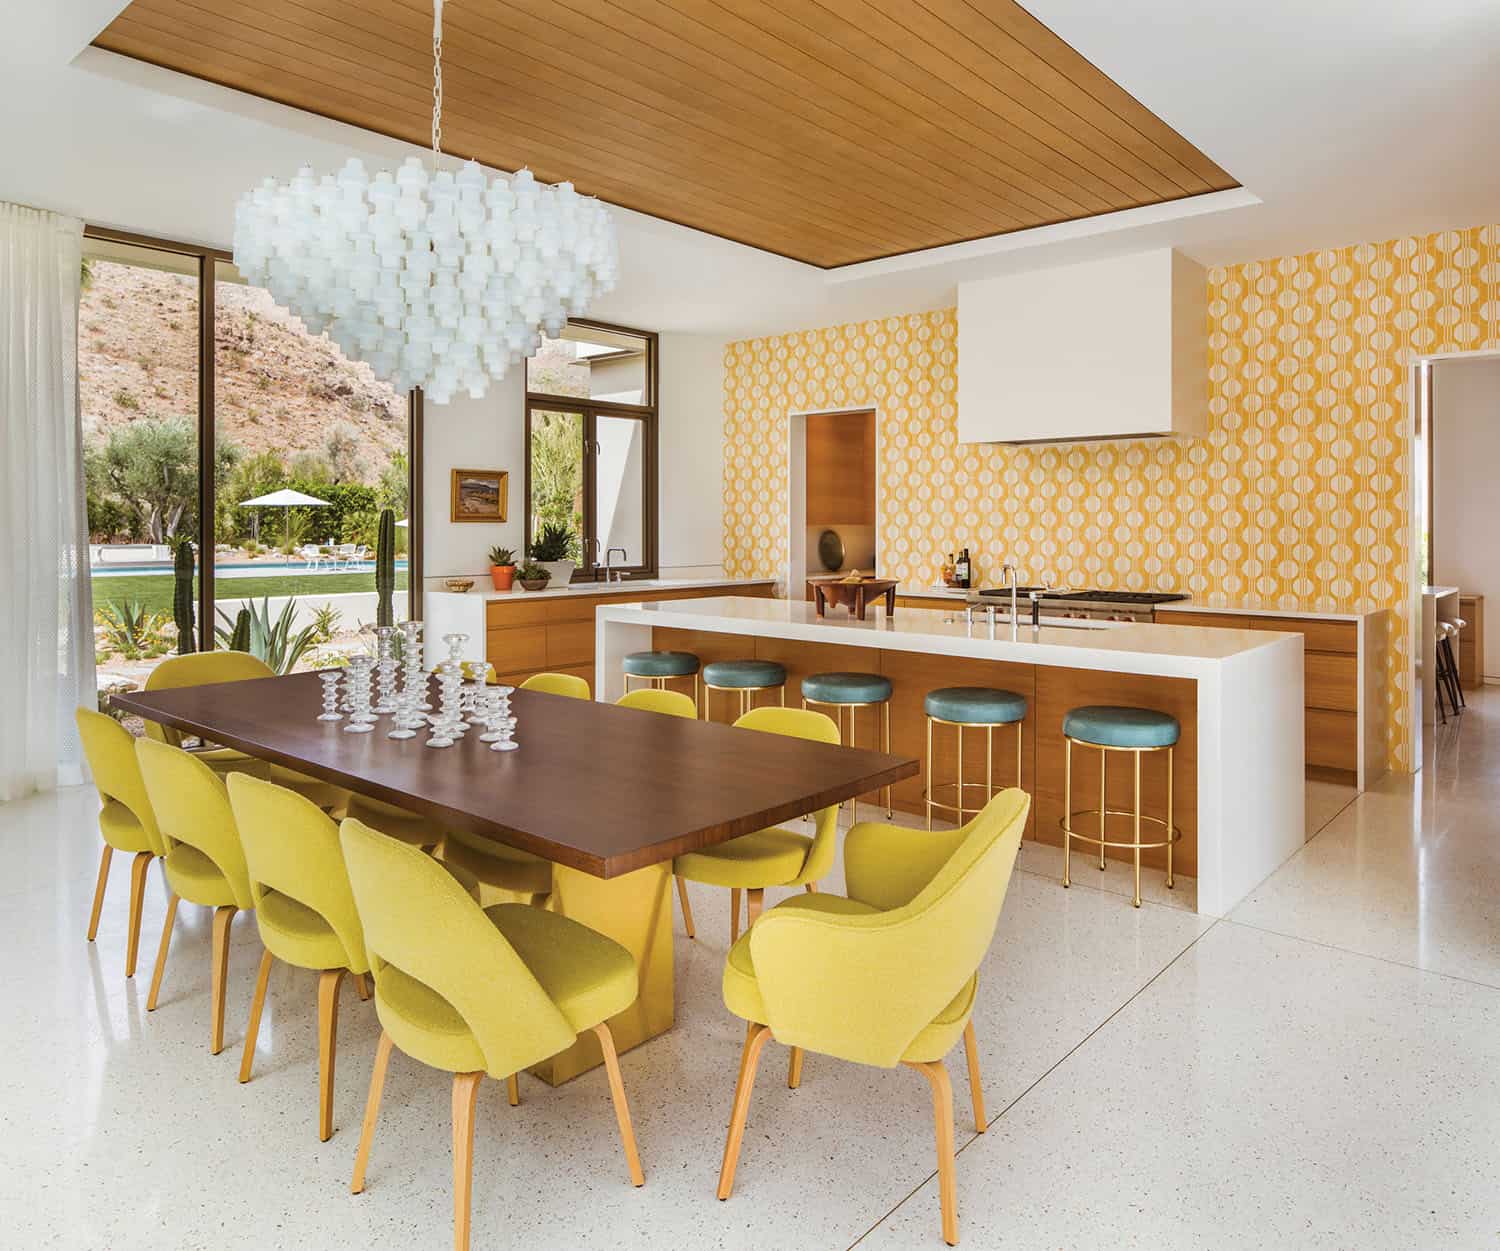 midcentury-modern-kitchen-and-dining-room